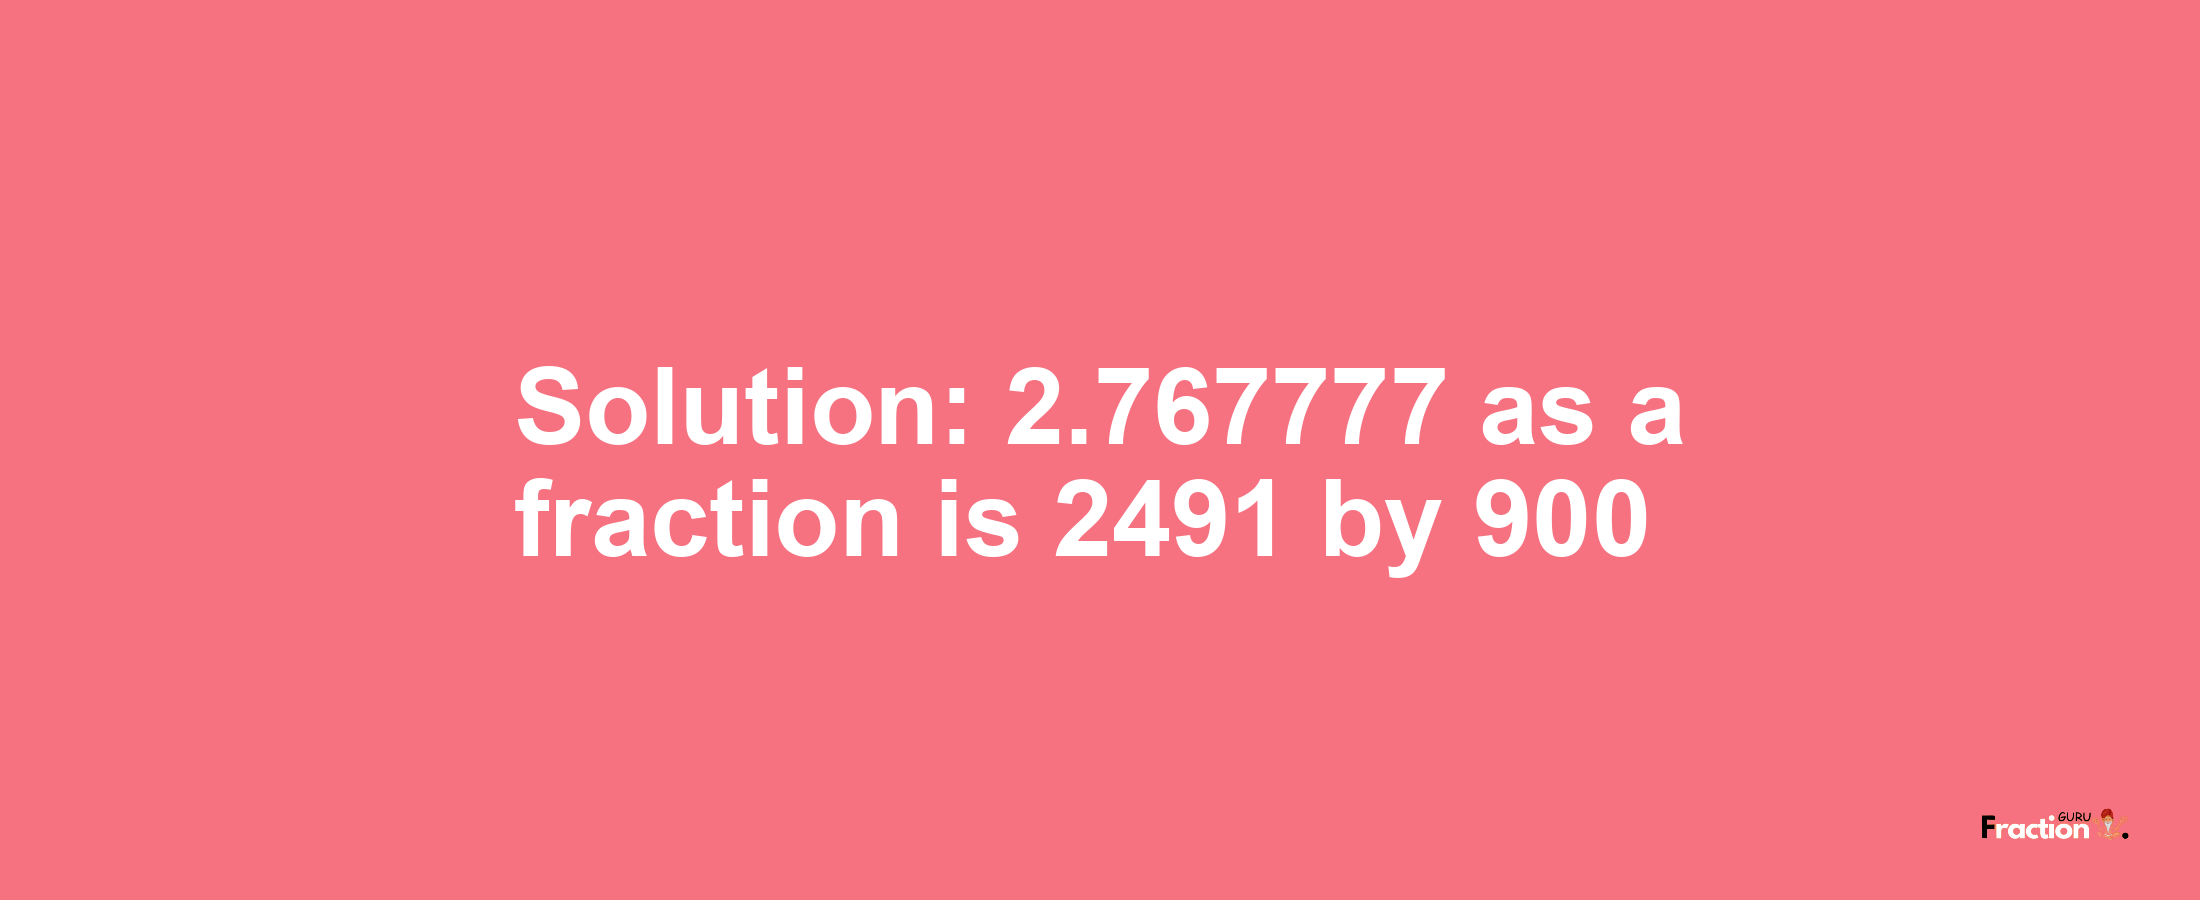 Solution:2.767777 as a fraction is 2491/900